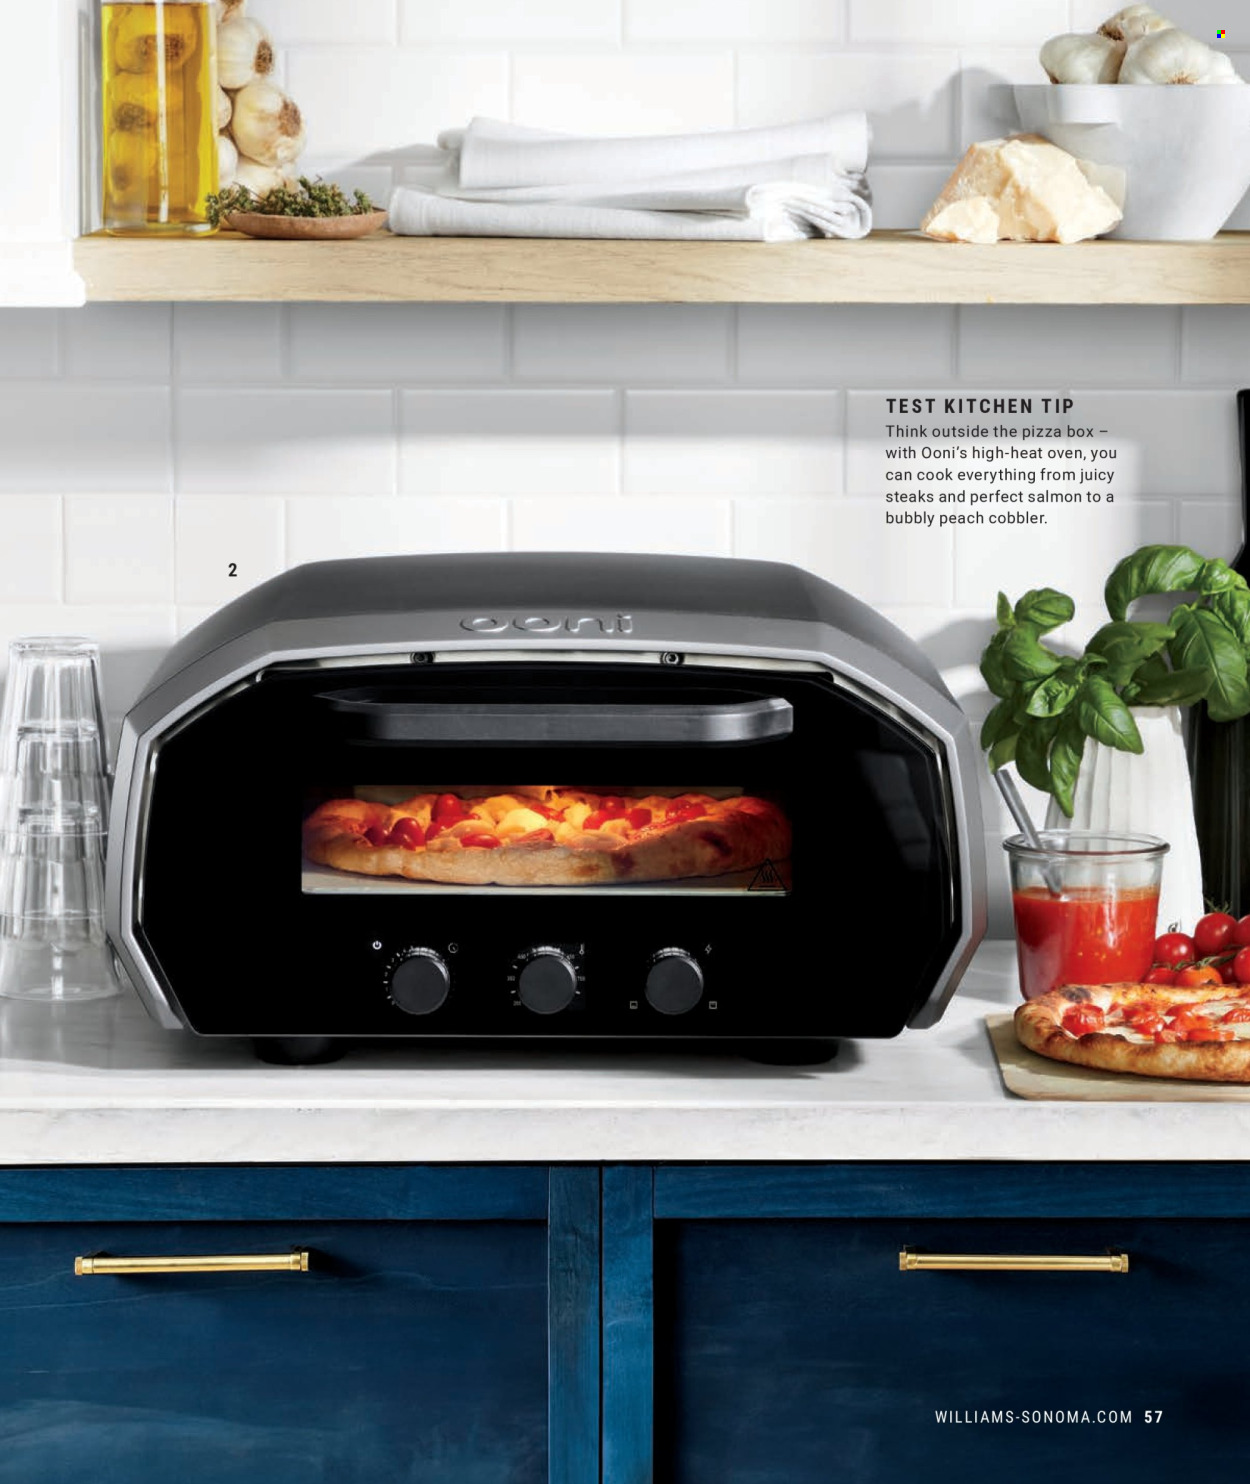 thumbnail - Williams-Sonoma Flyer - Sales products - oven. Page 57.